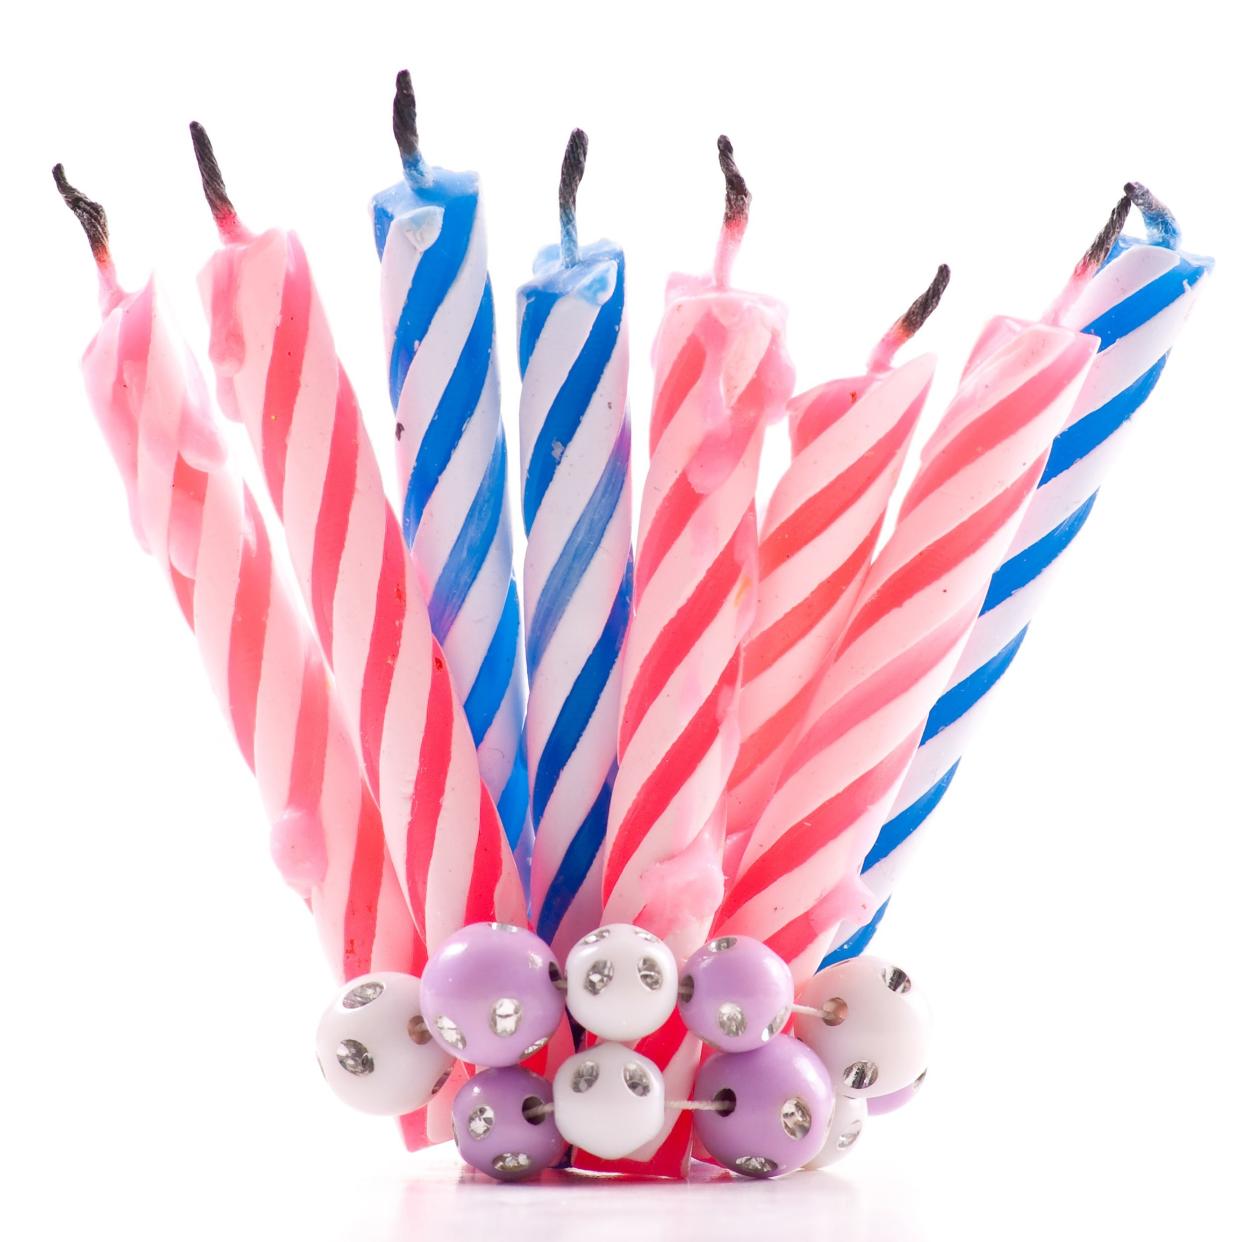 array of blue and pink birthday candles that have already been used